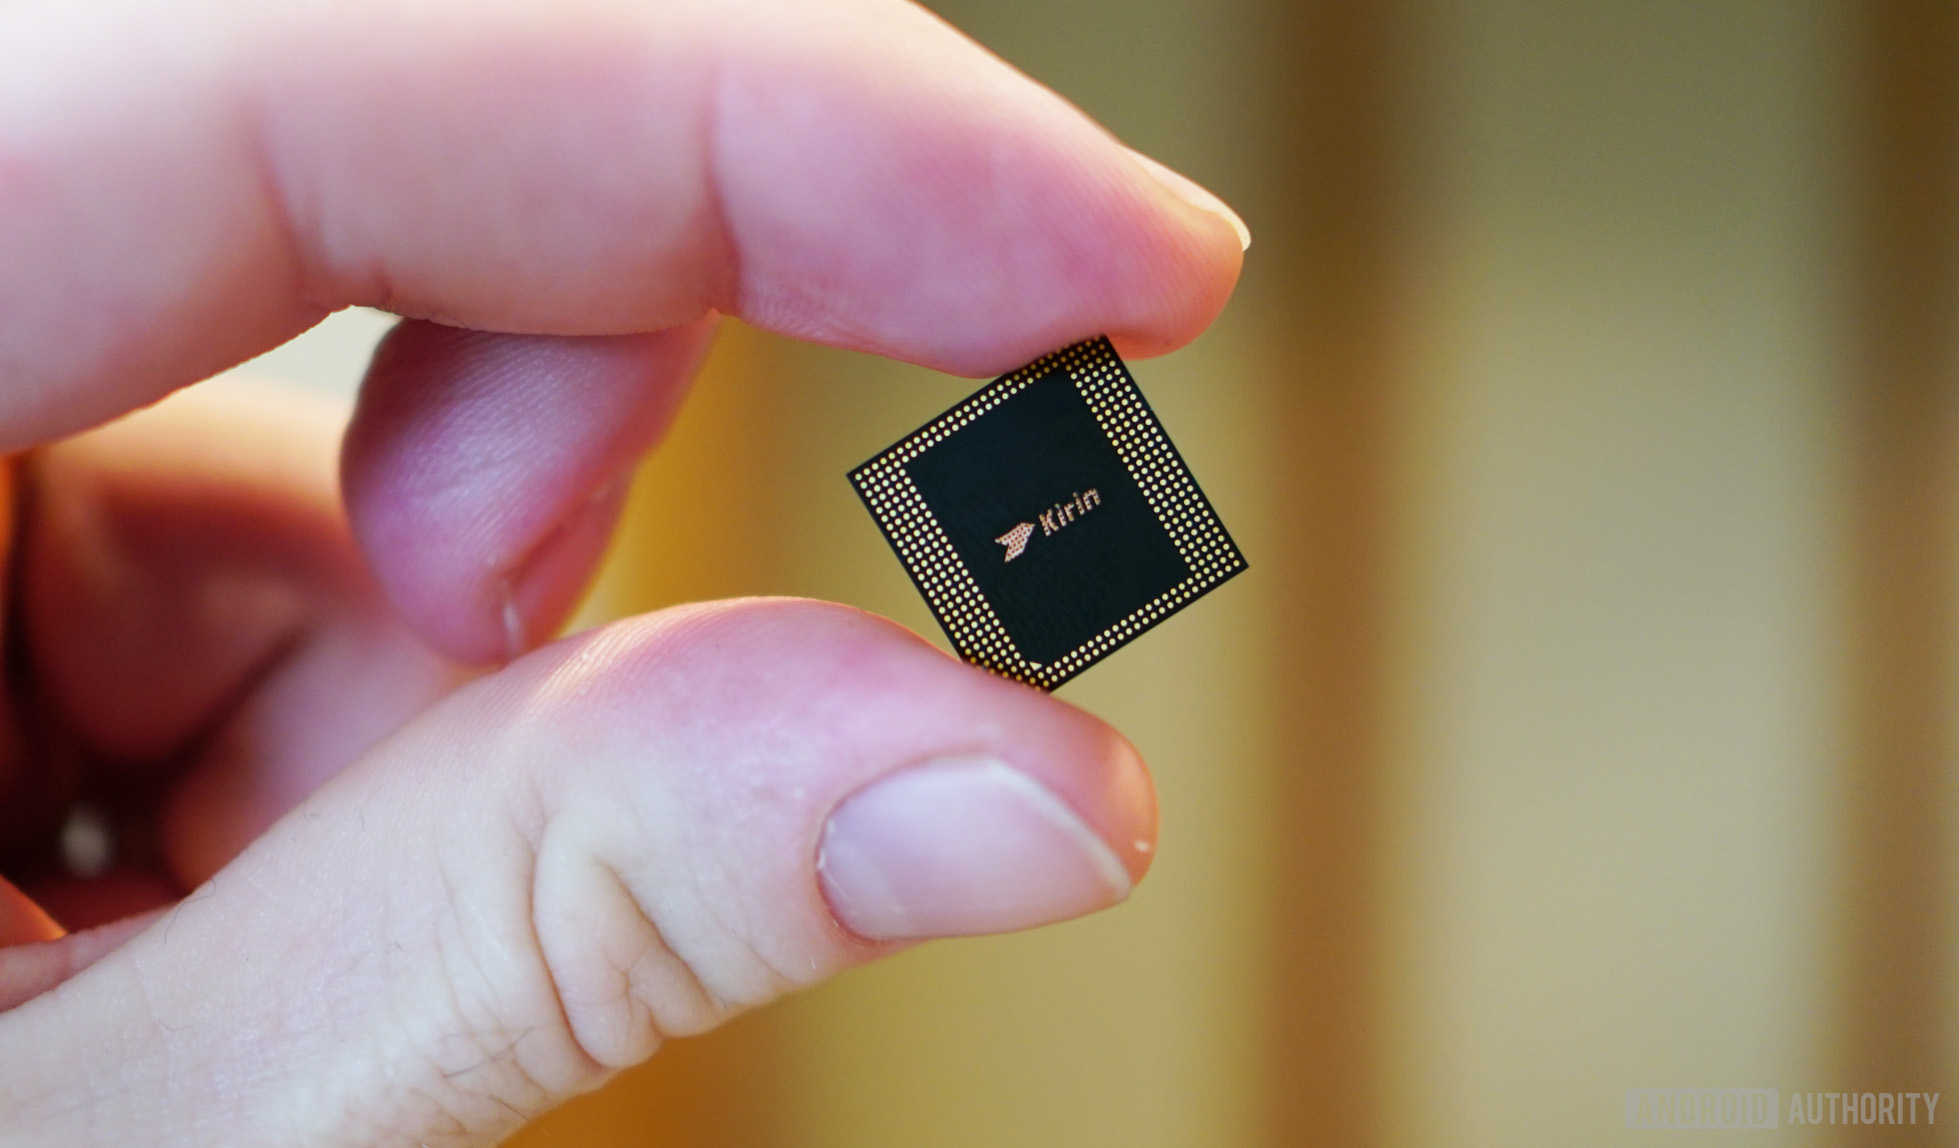 The HUAWEI Kirin 980 chipset between a person's finger and thumb.